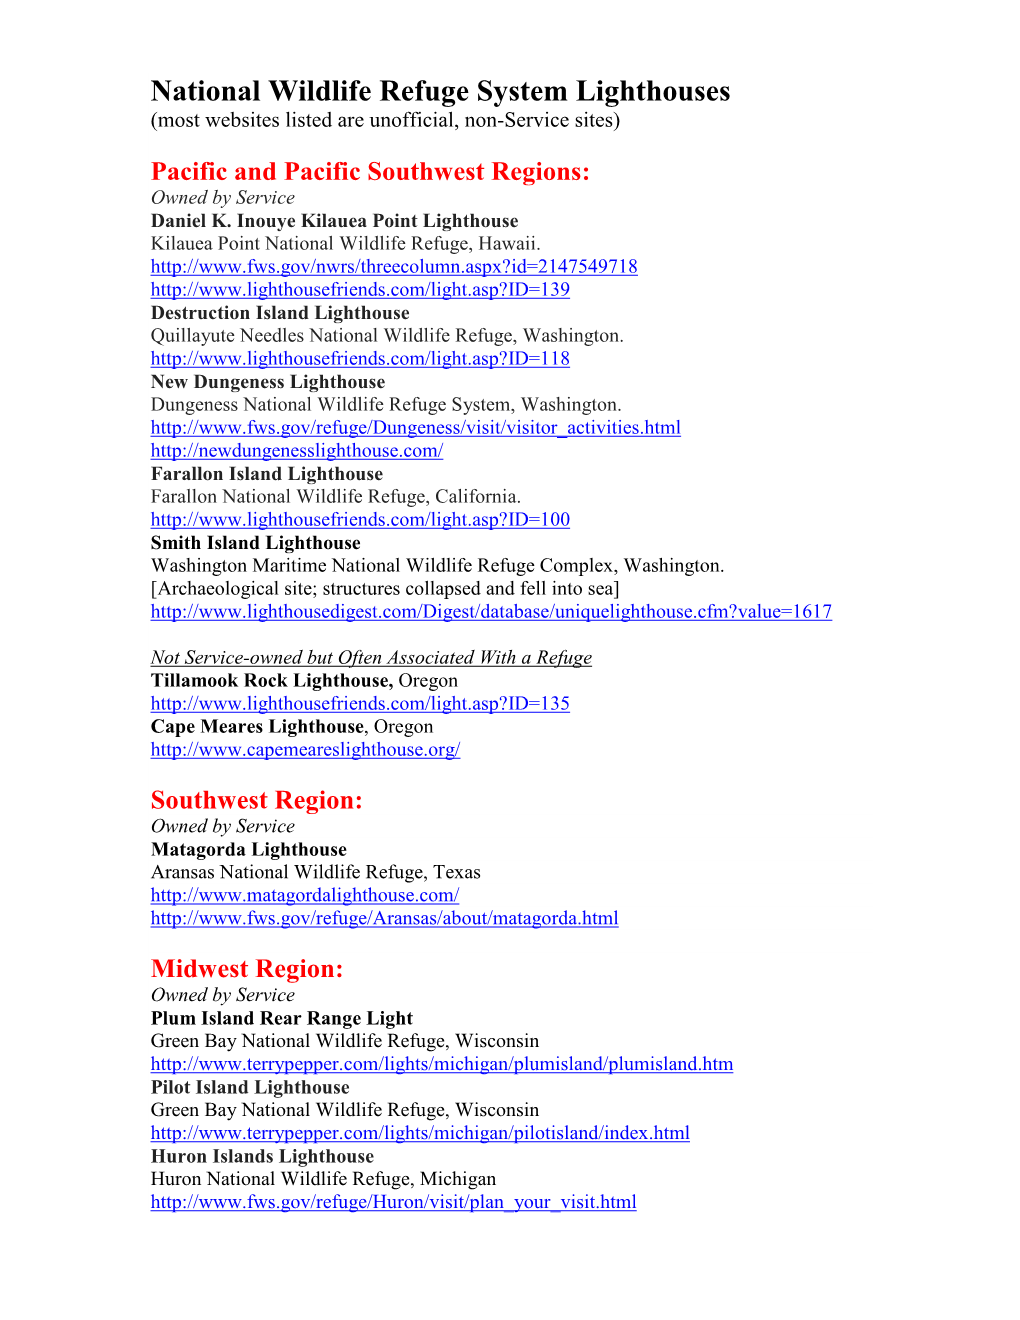 National Wildlife Refuge System Lighthouses (Most Websites Listed Are Unofficial, Non-Service Sites)